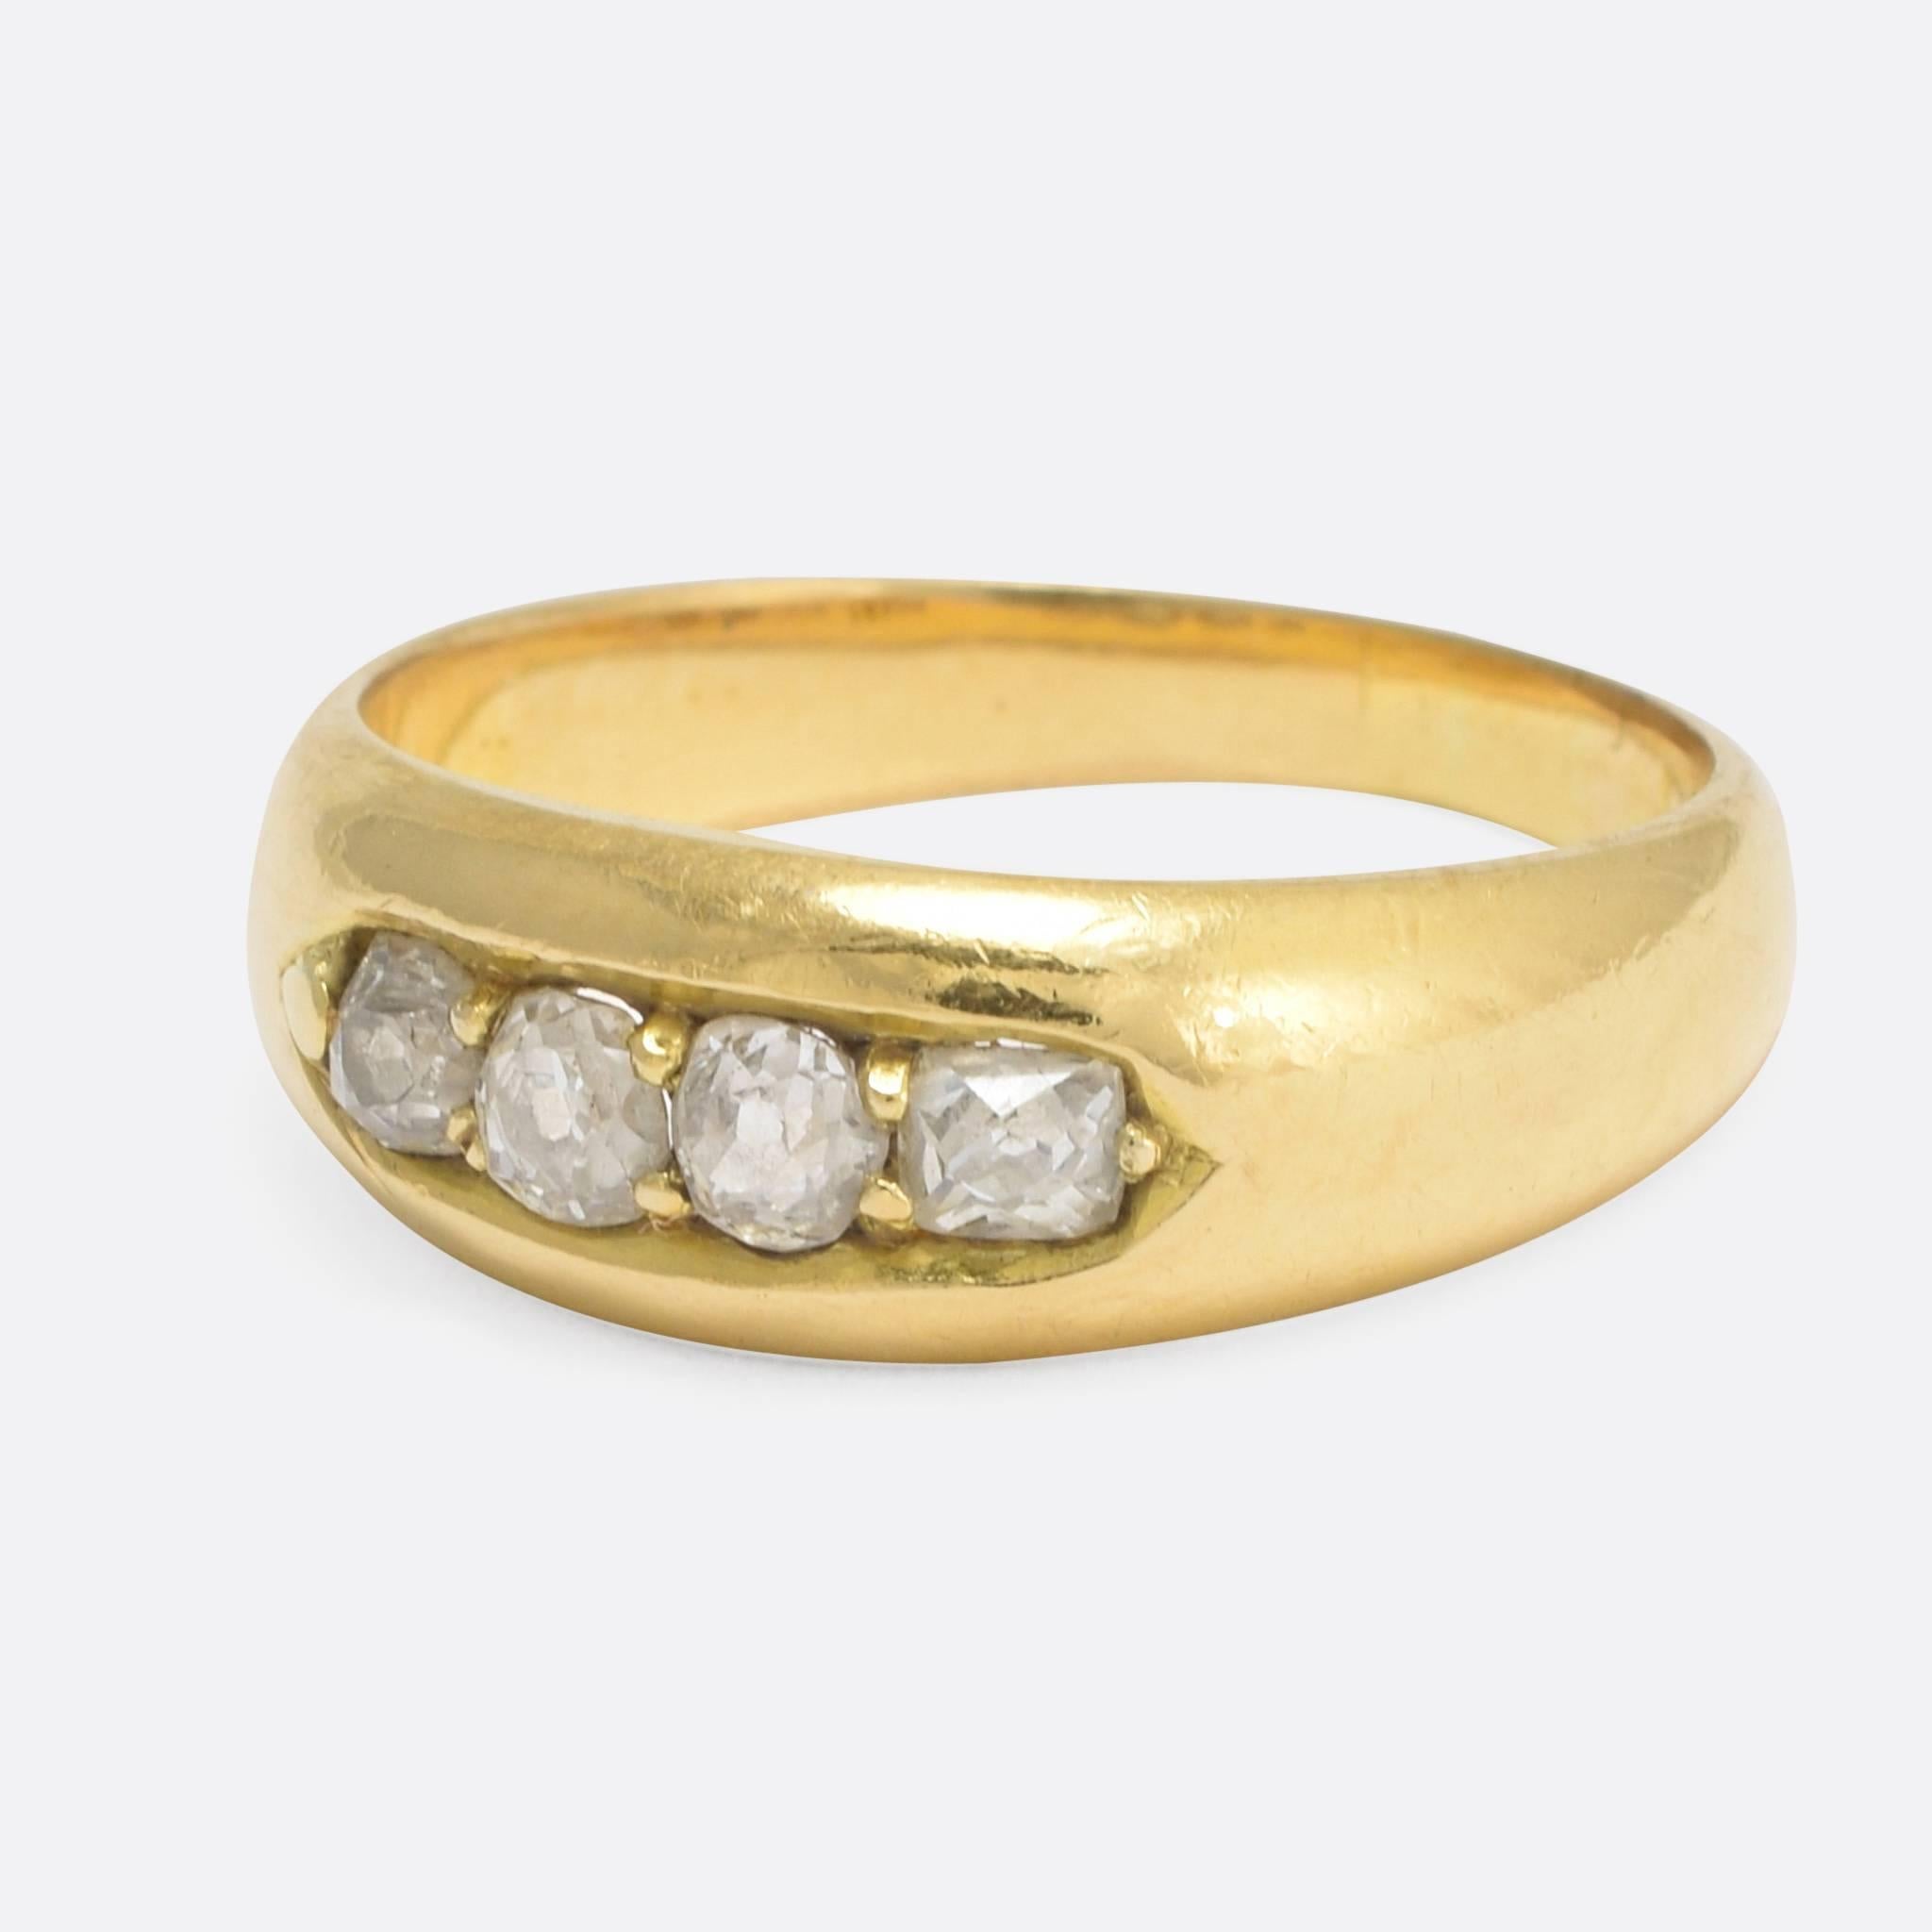 A lovely antique gypsy ring set with four diamonds: three old European cuts, and one old mine cut - the total carat weight is approximately .40ct. The plain band is modelled in 18k yellow gold, that has developed a beautiful antique patina over the